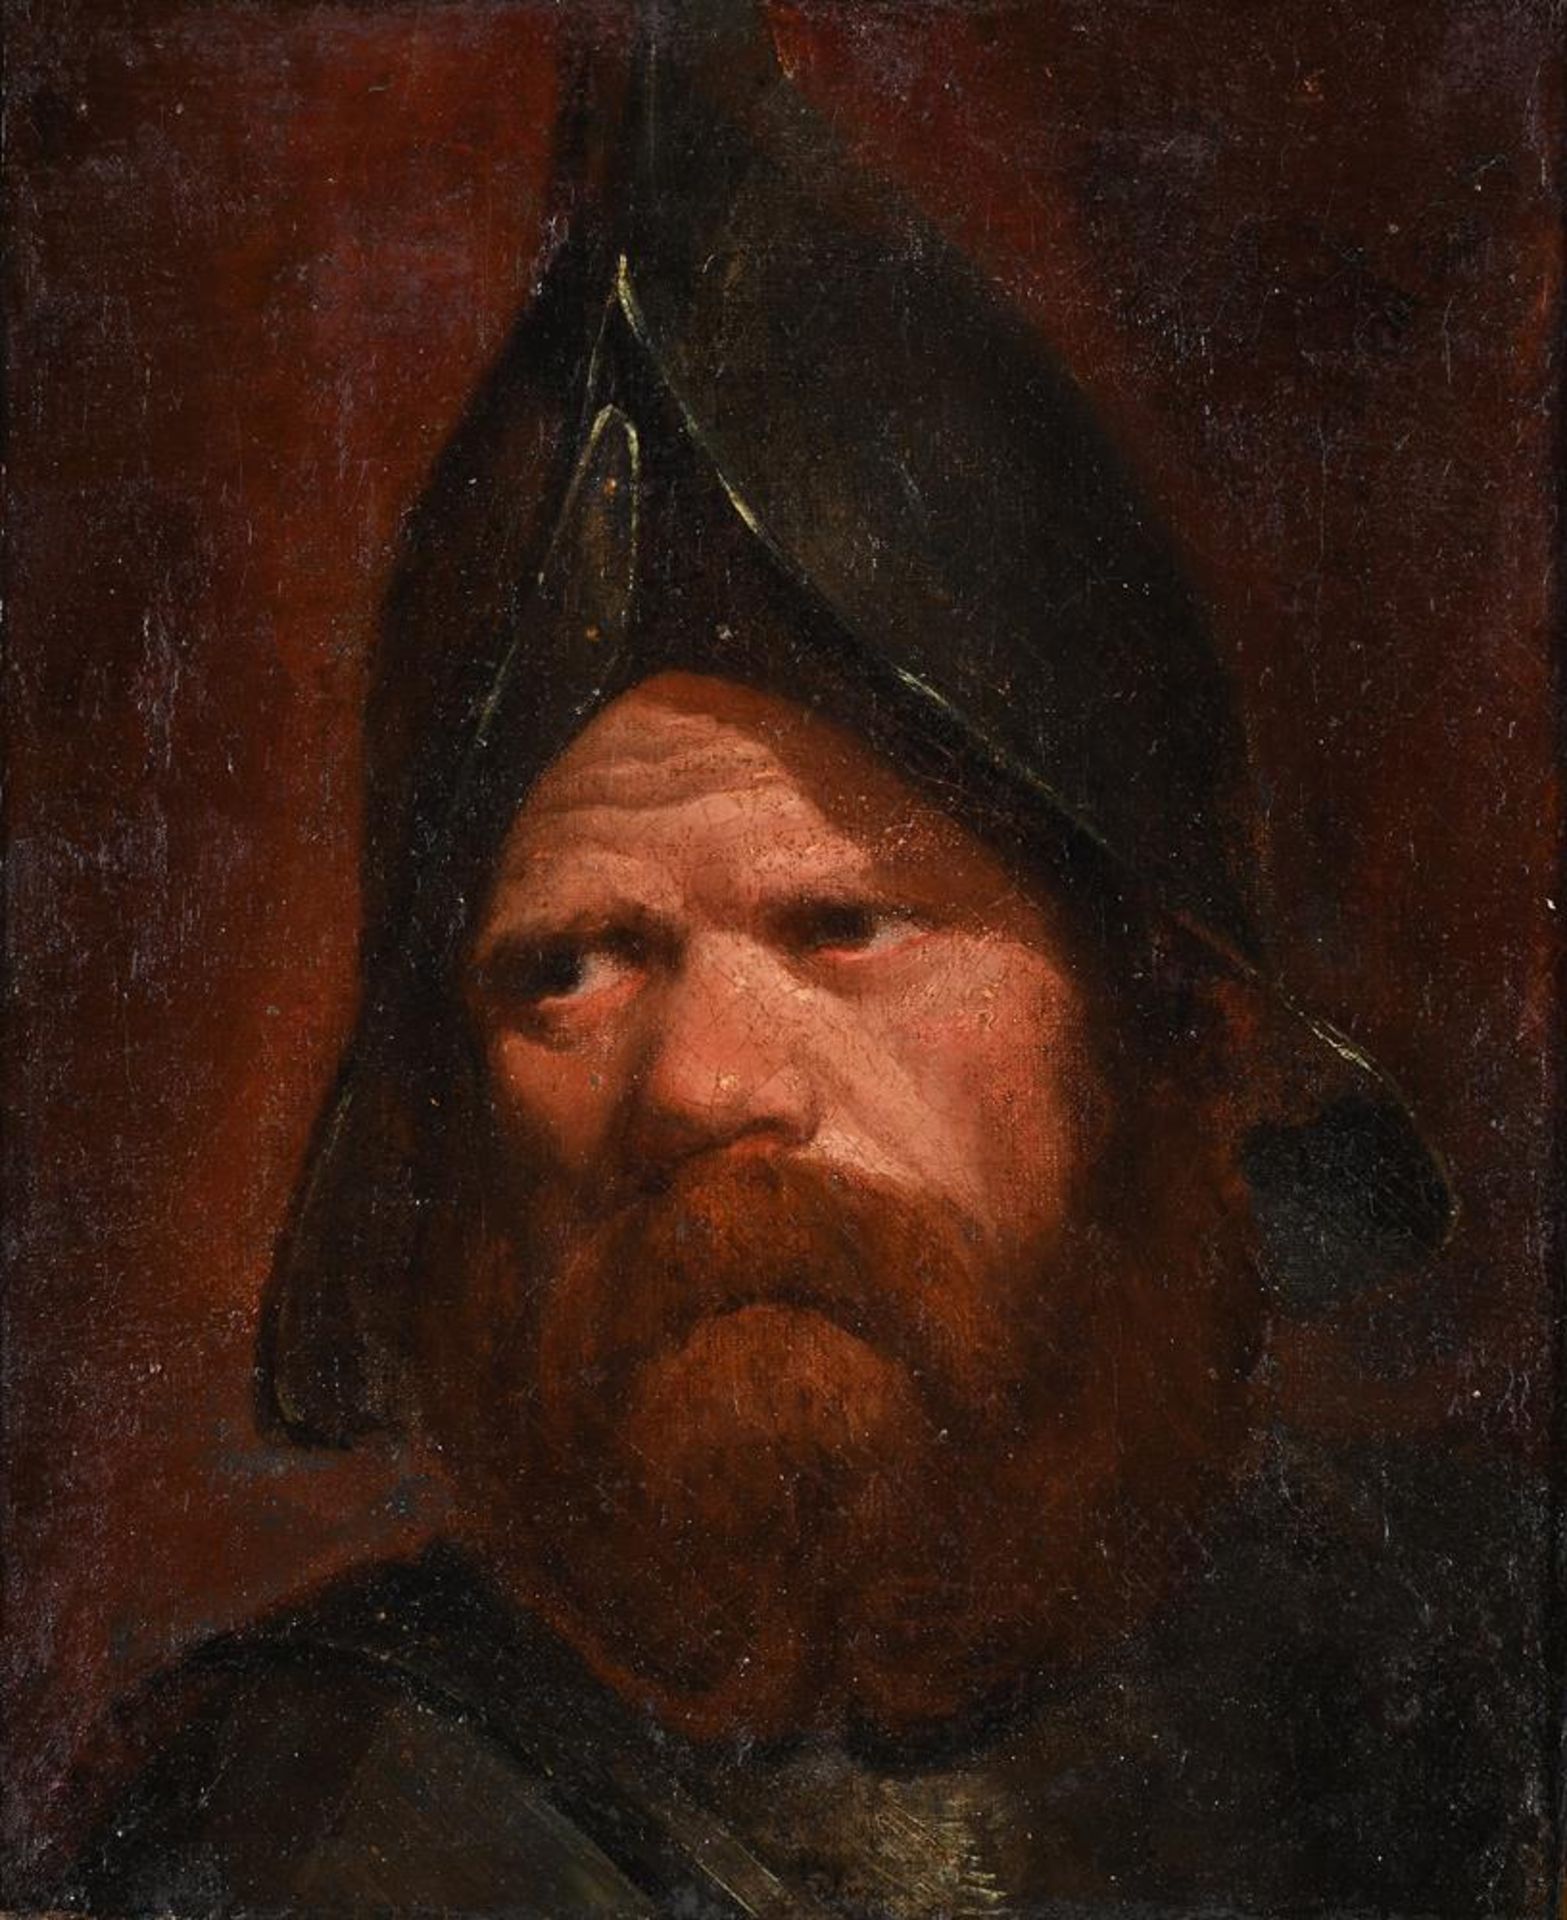 FOLLOWER OF REMBRANDT, PORTRAIT OF A SOLDIER WEARING A HELMET